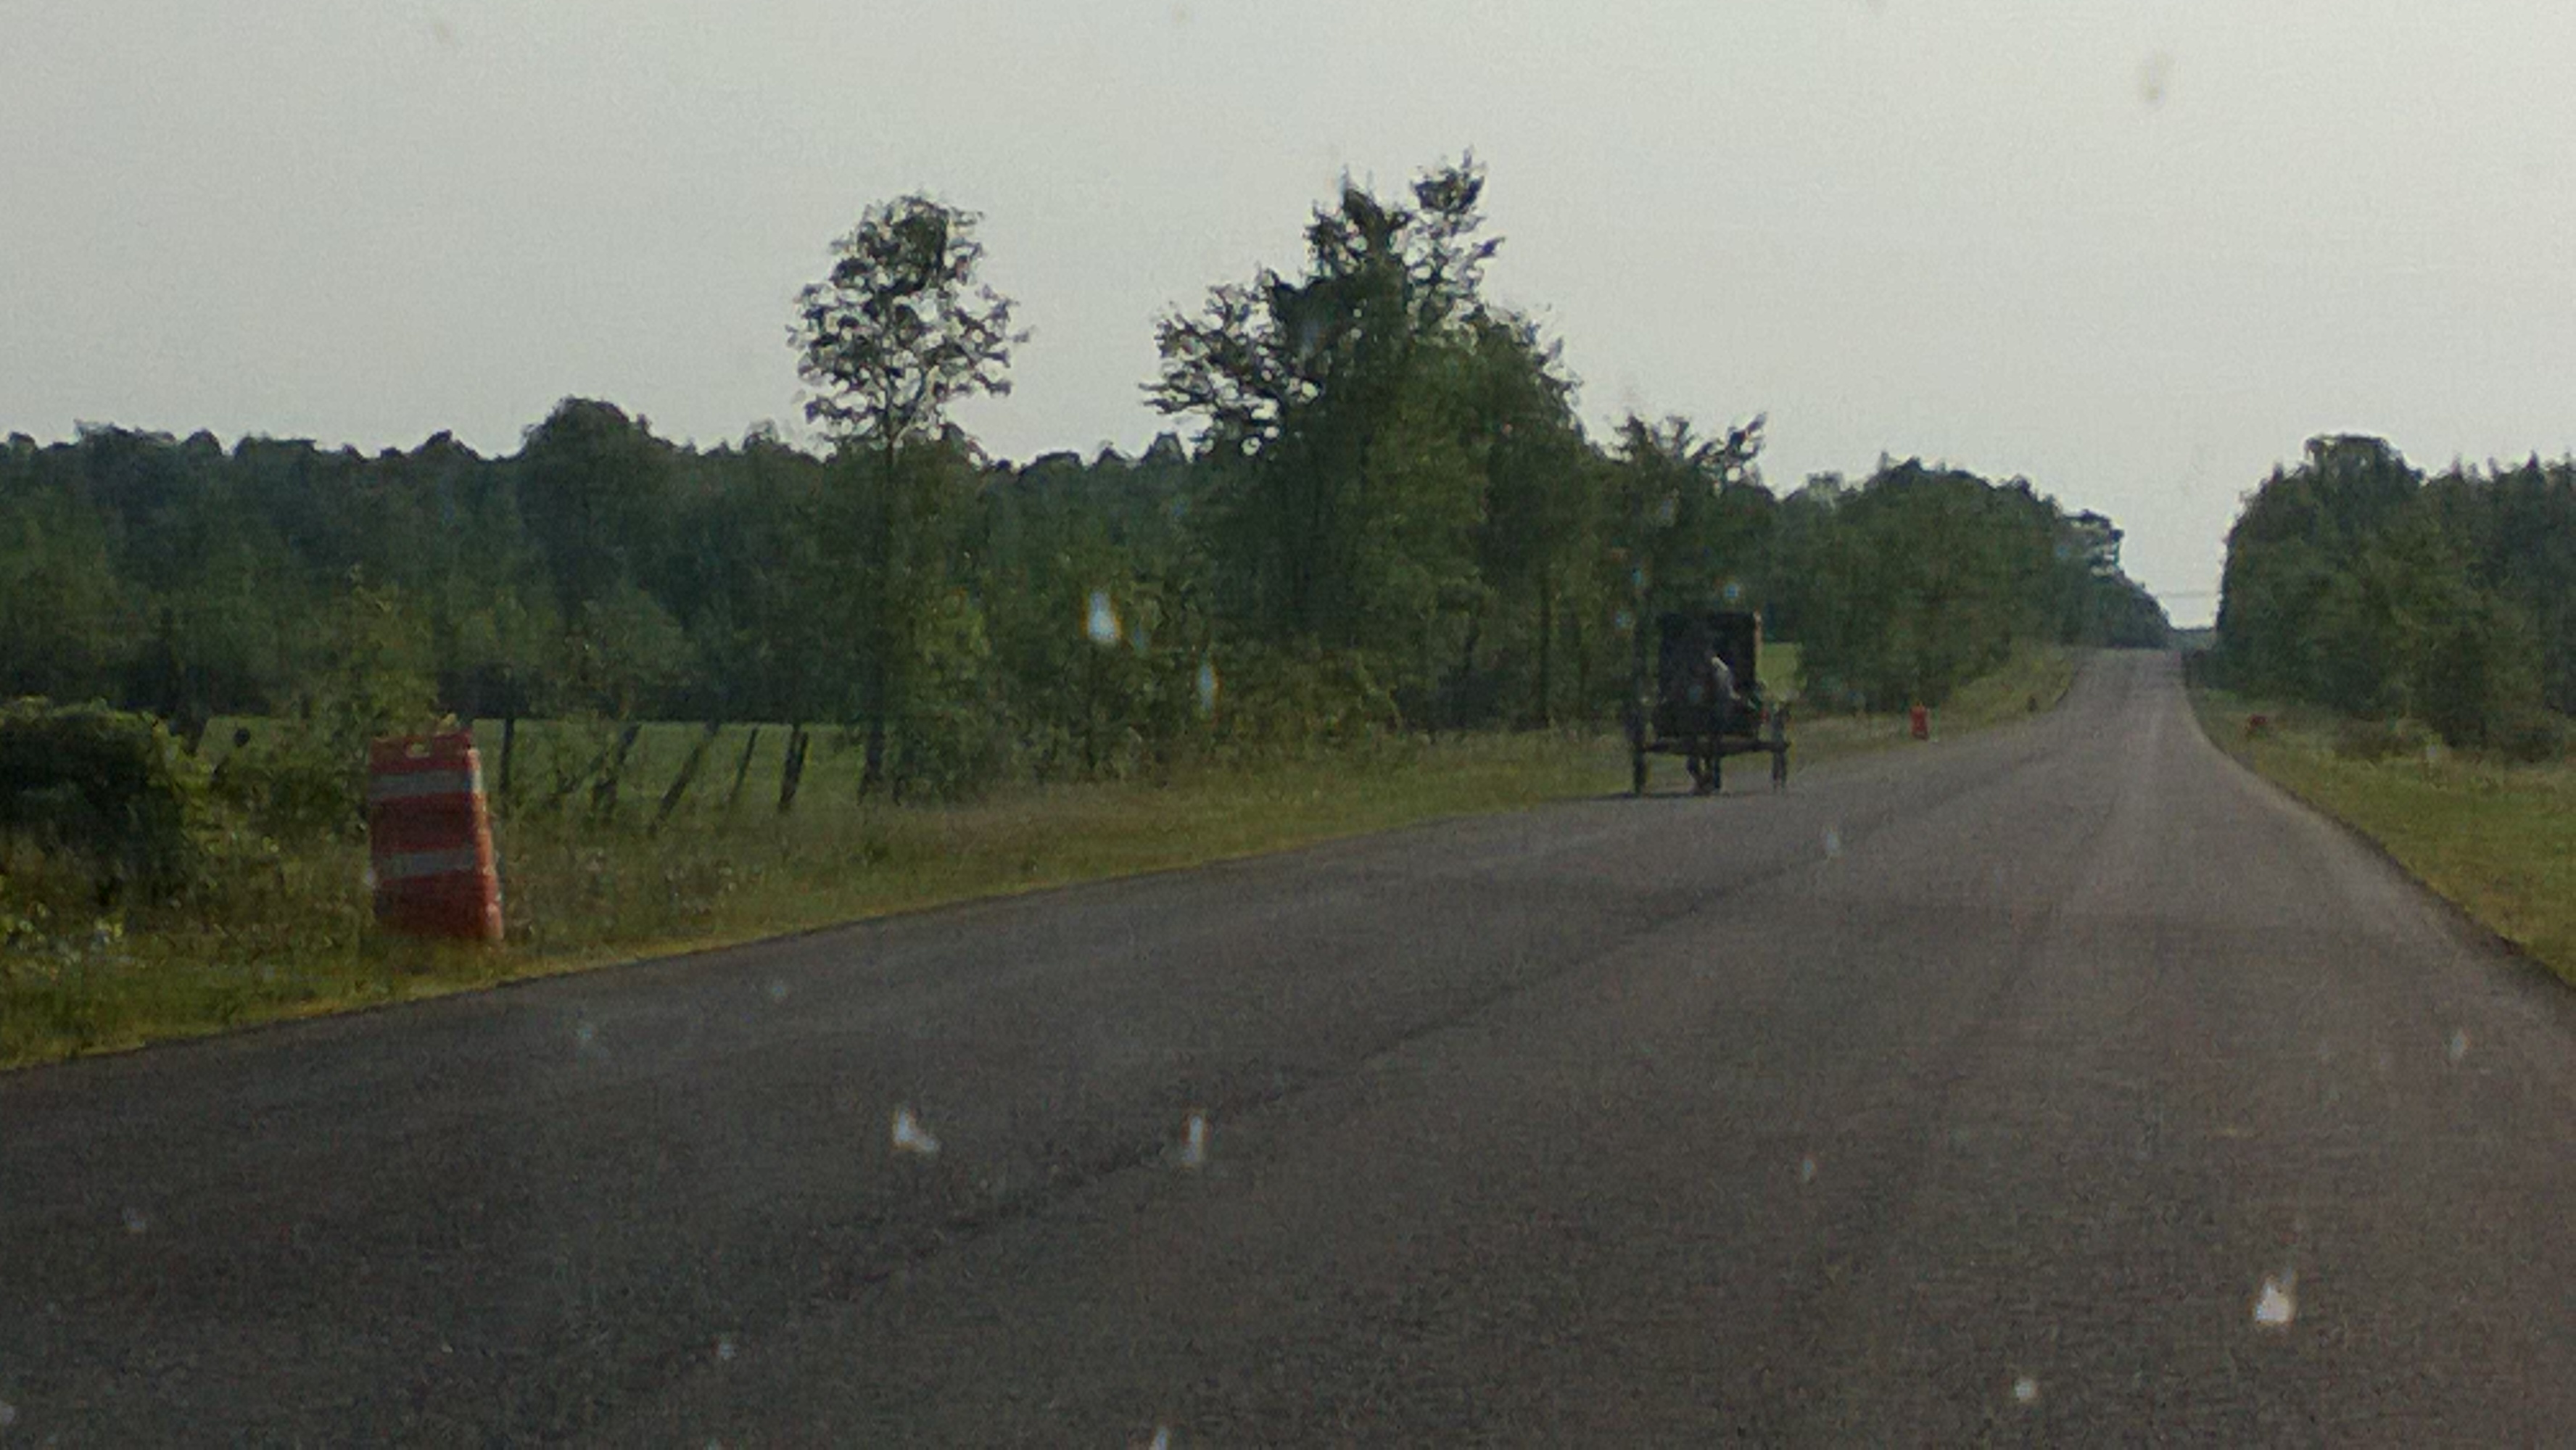 amish carriage